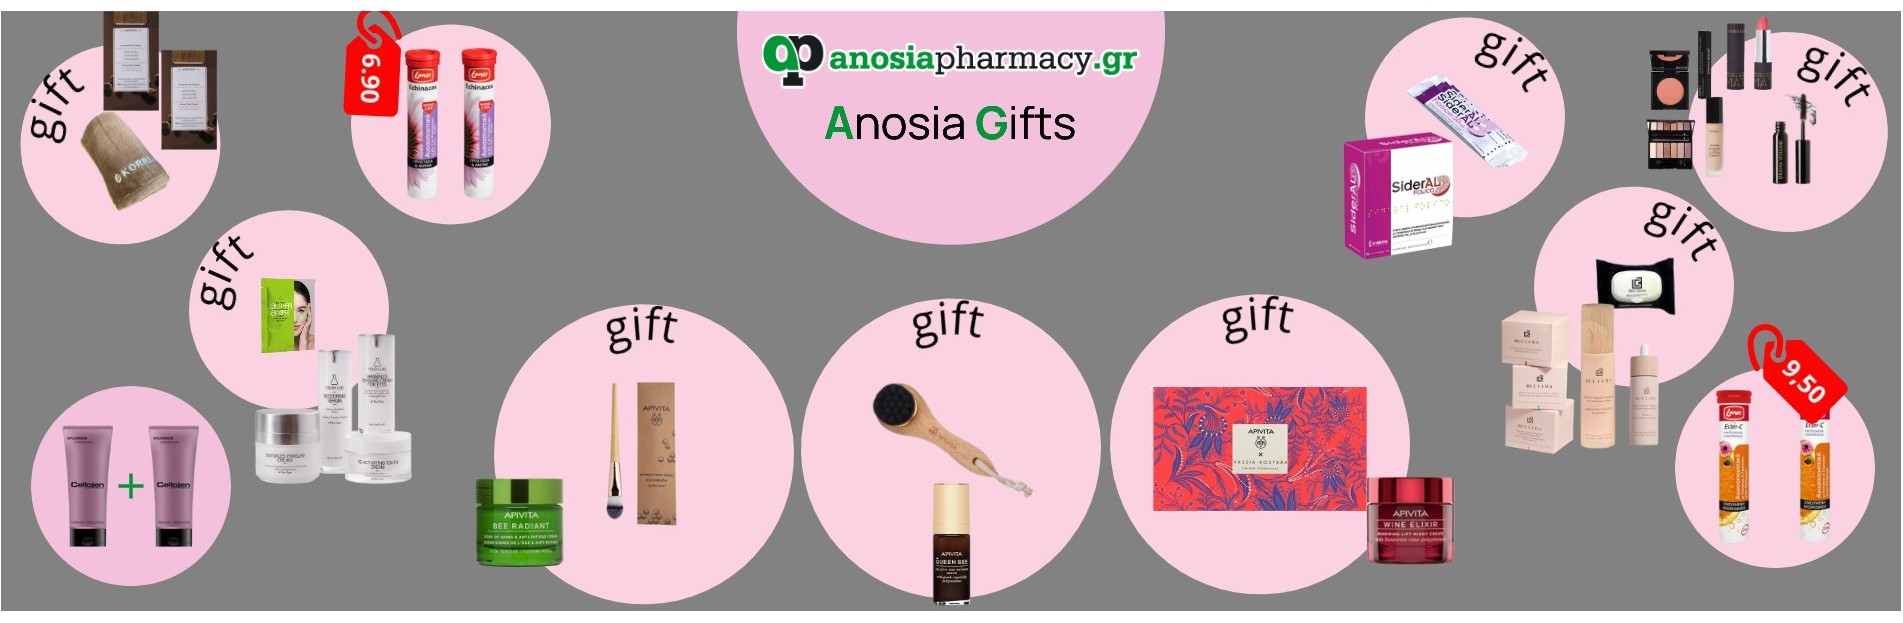 ANOSIA GIFTS